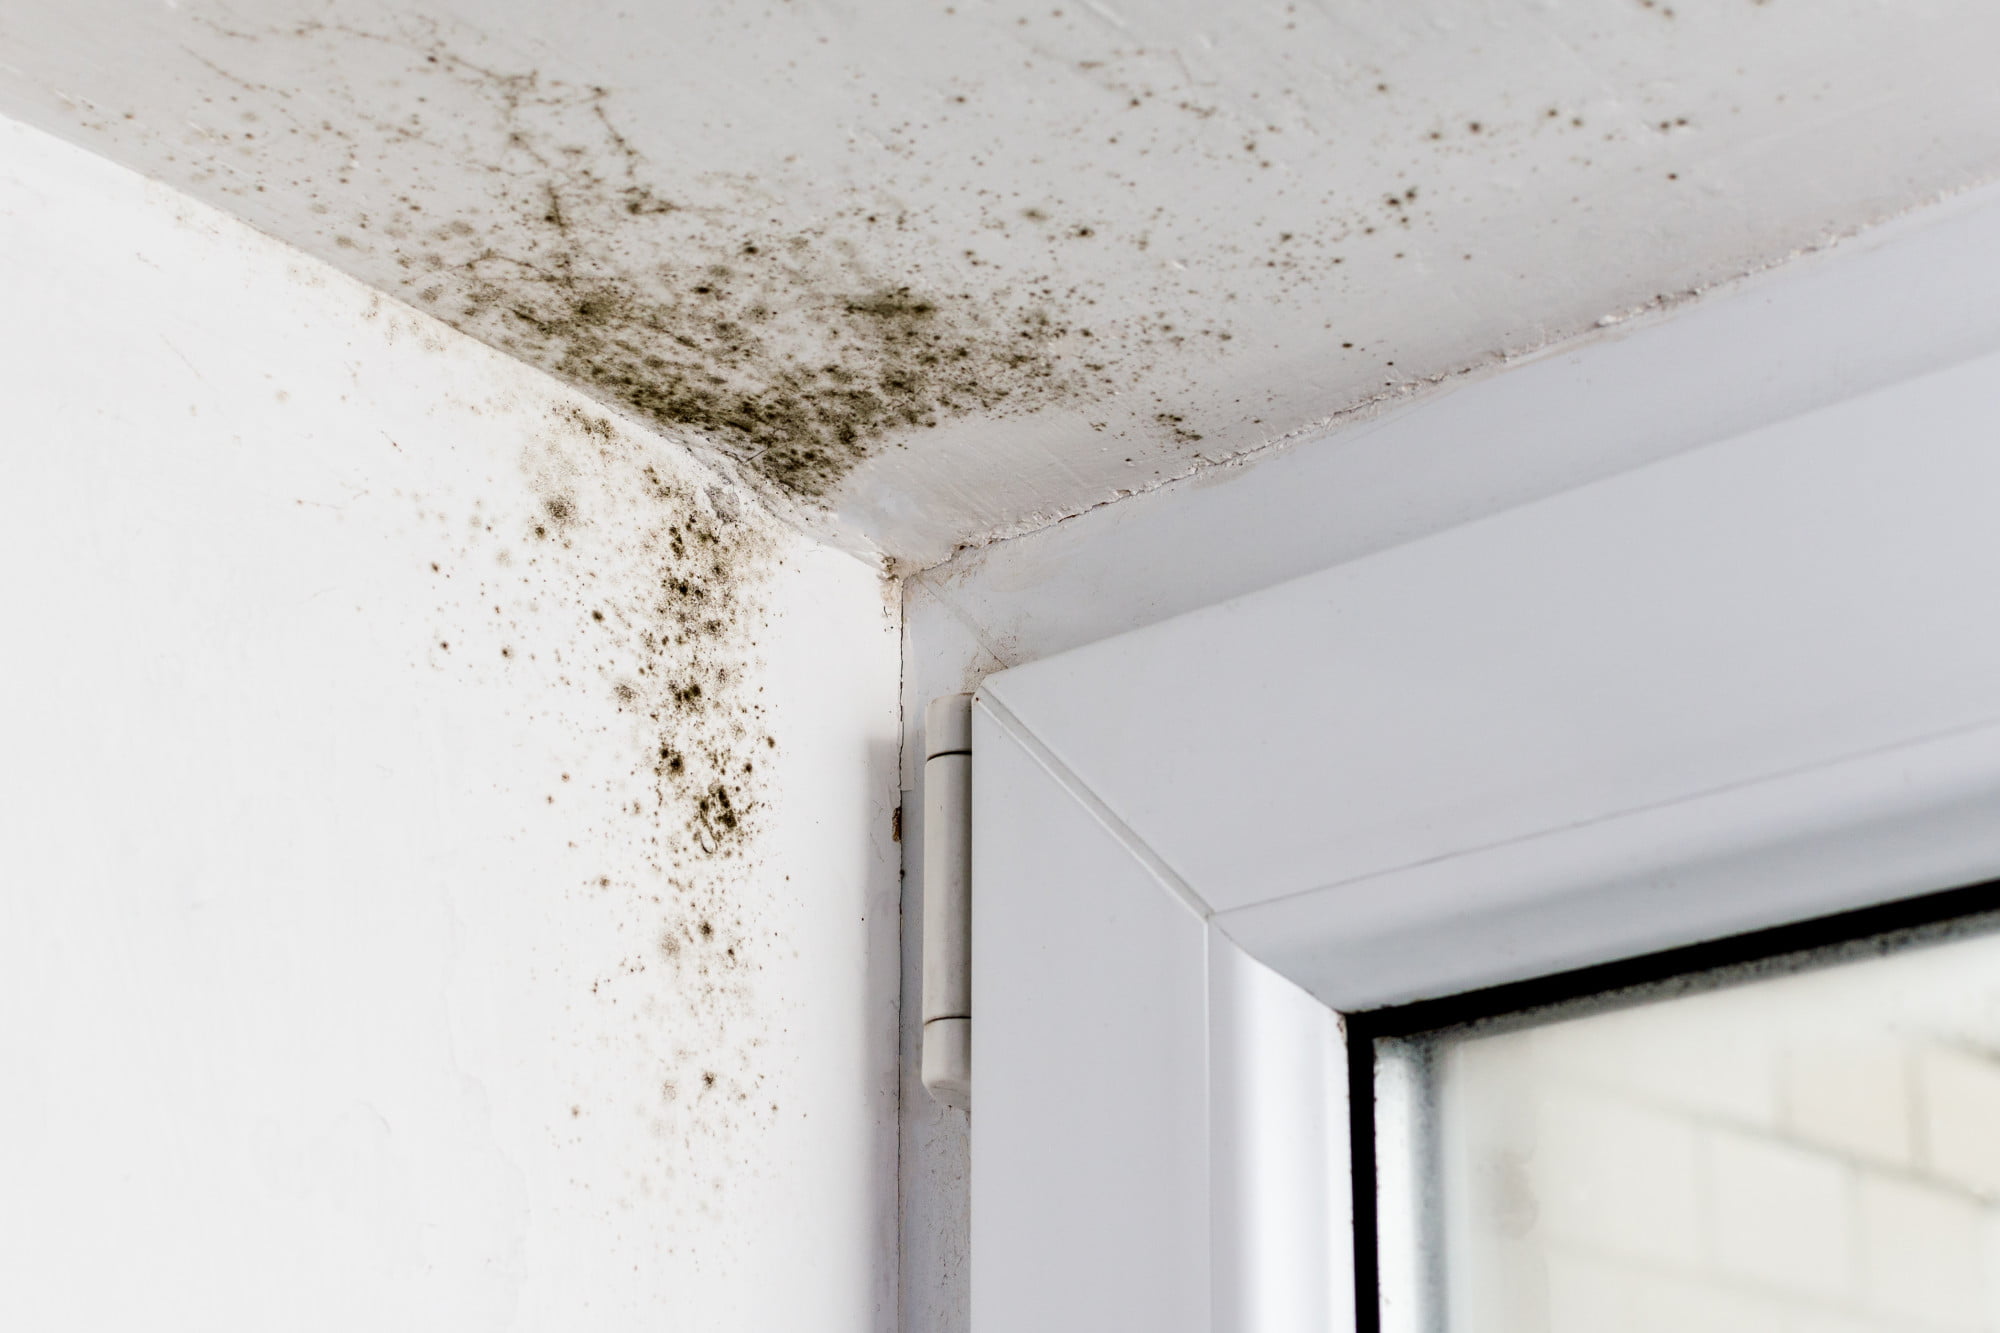 Did you know that not all mold is grown equal these days? Here are the many different types of mold that may lurk in your home today.